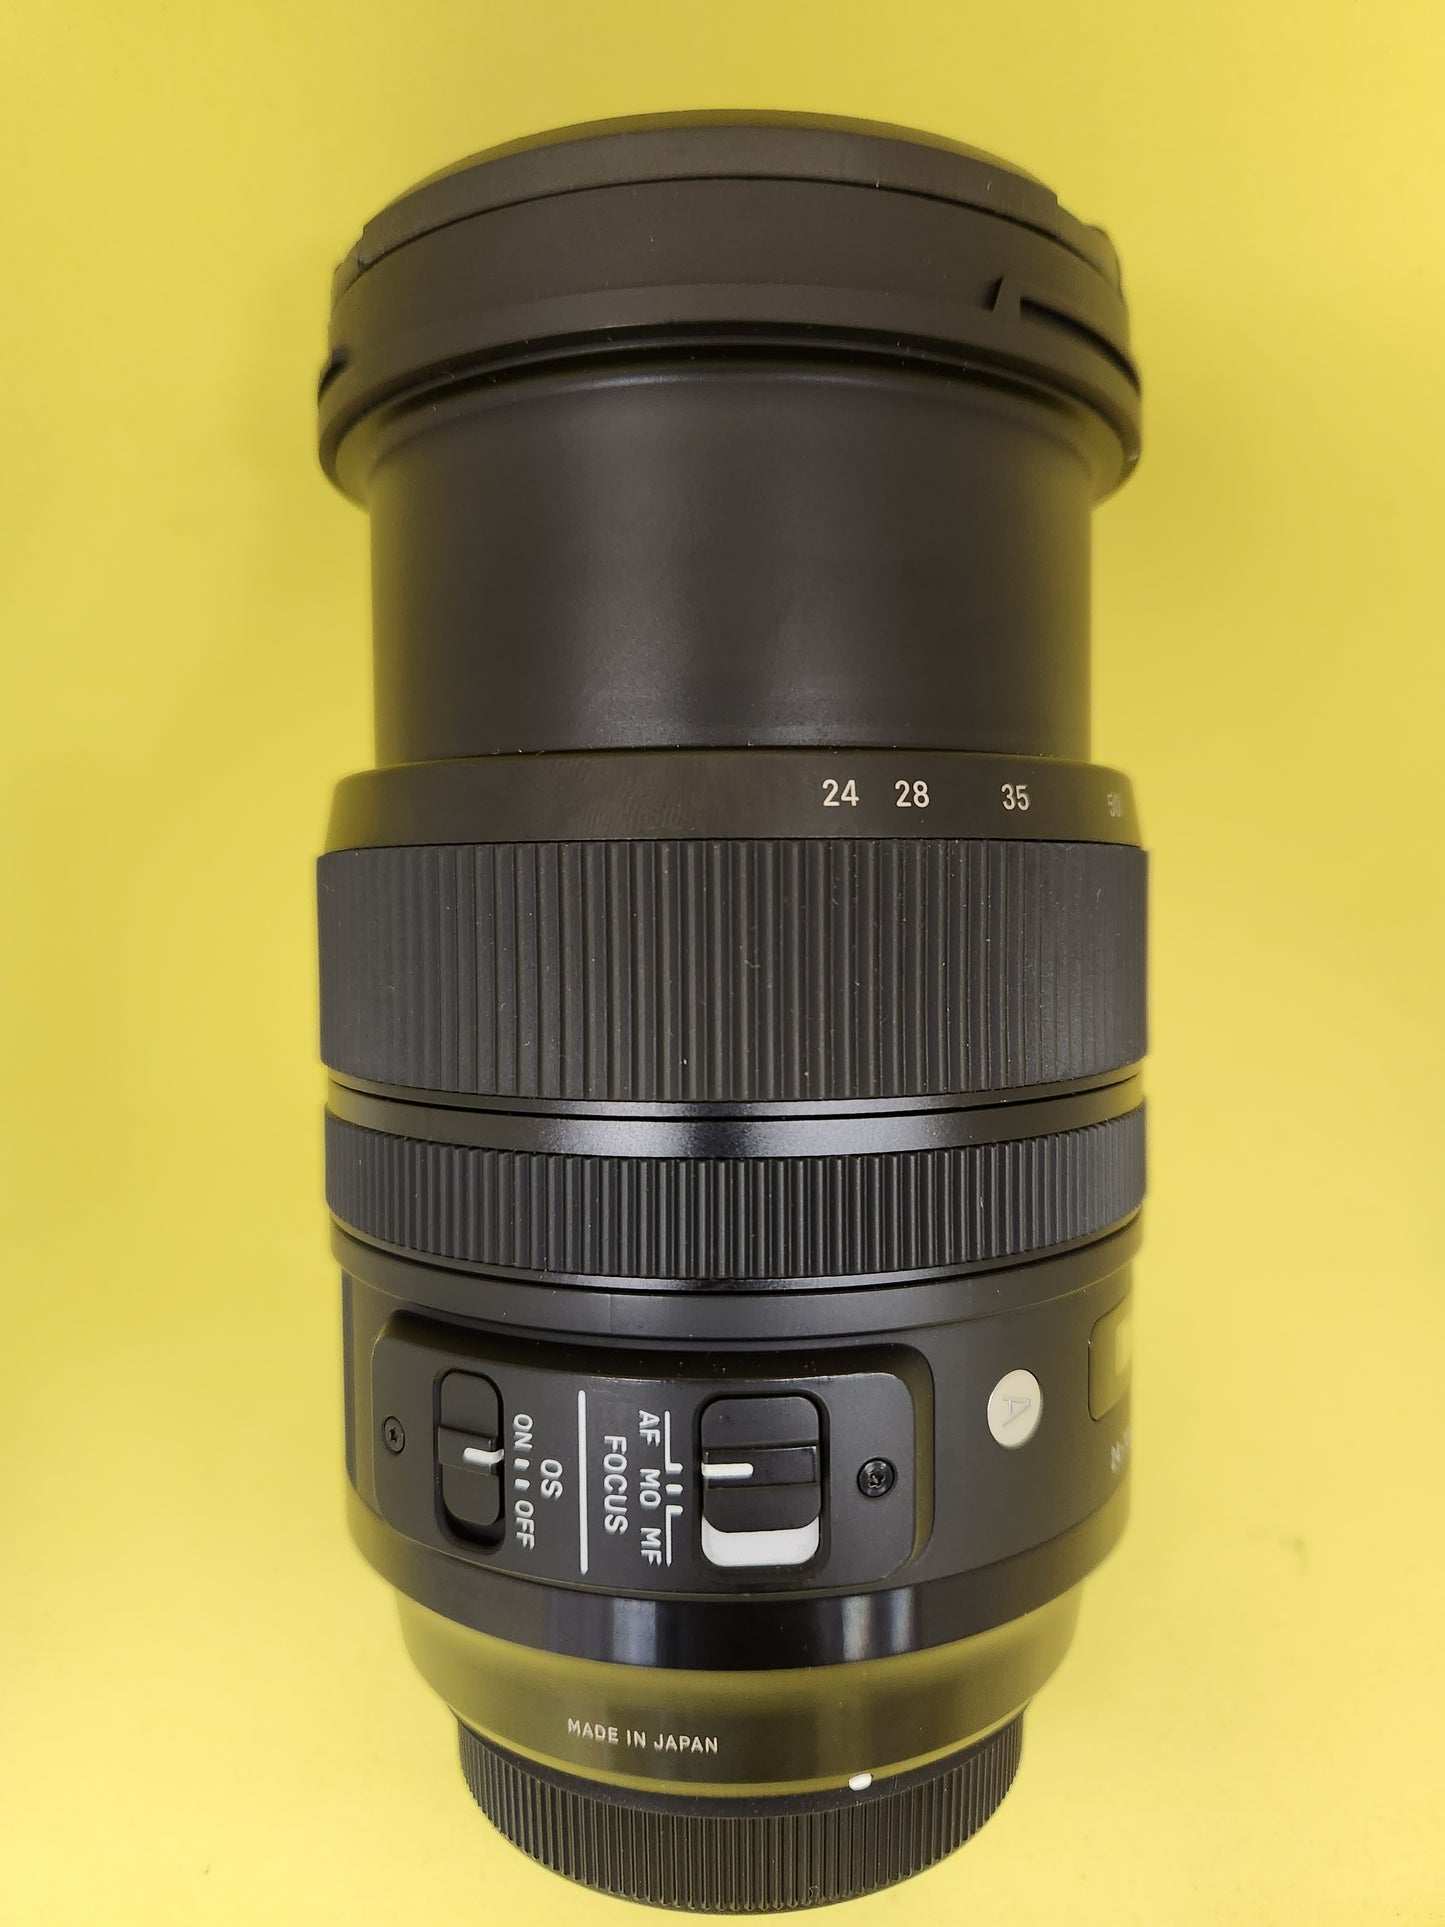 Sigma lens 24-70mm f2.8 DG OS HSM ART-canon fit used